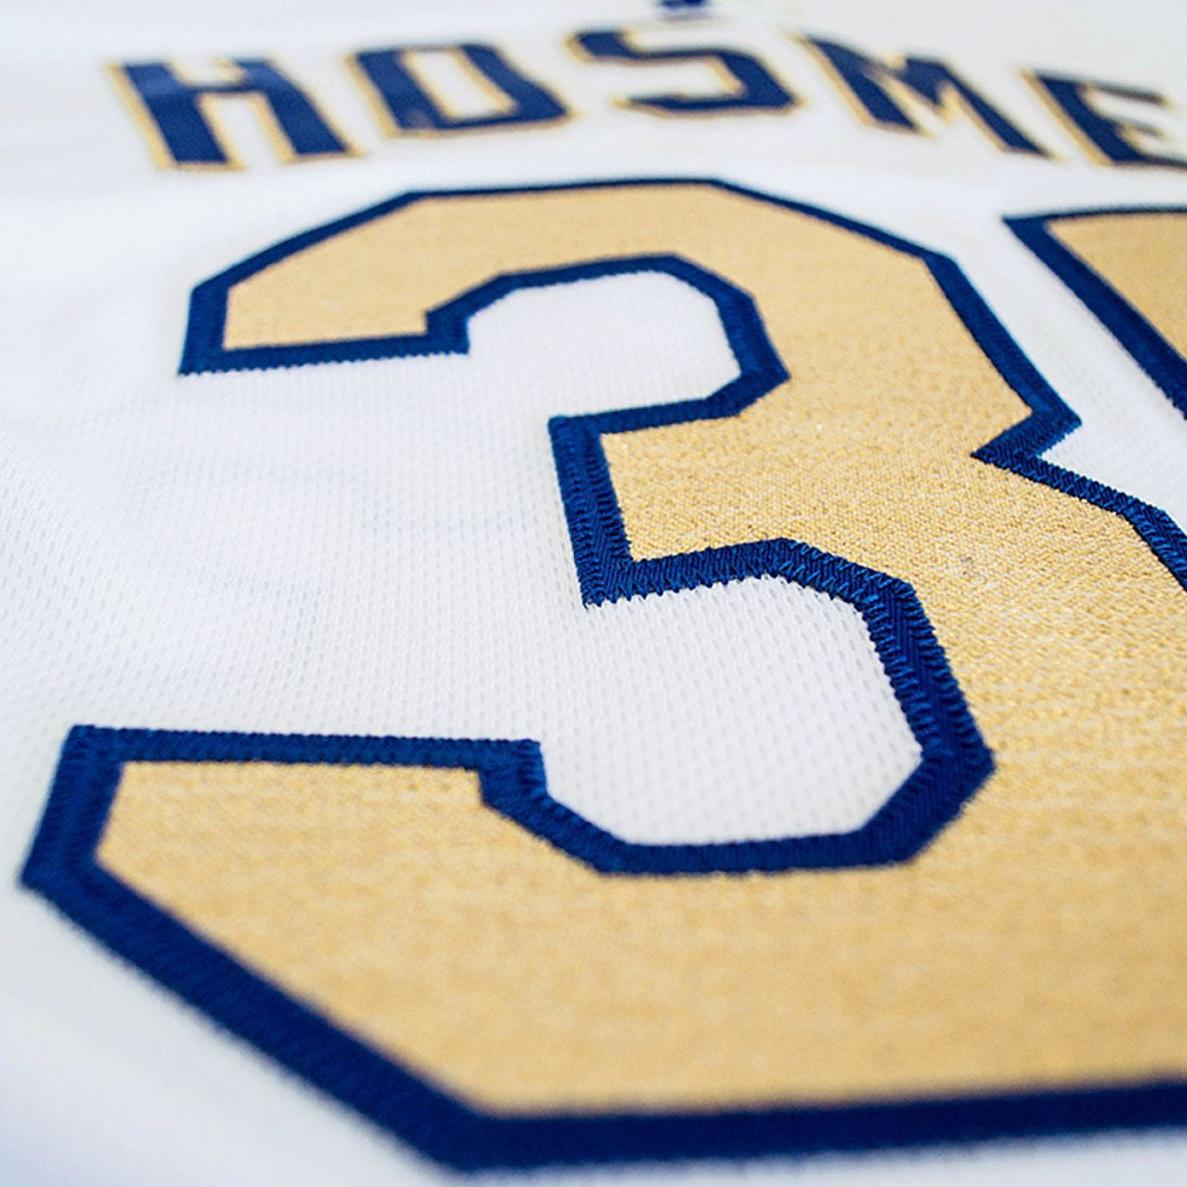 Royals will wear gold-trimmed uniforms for Friday home games 